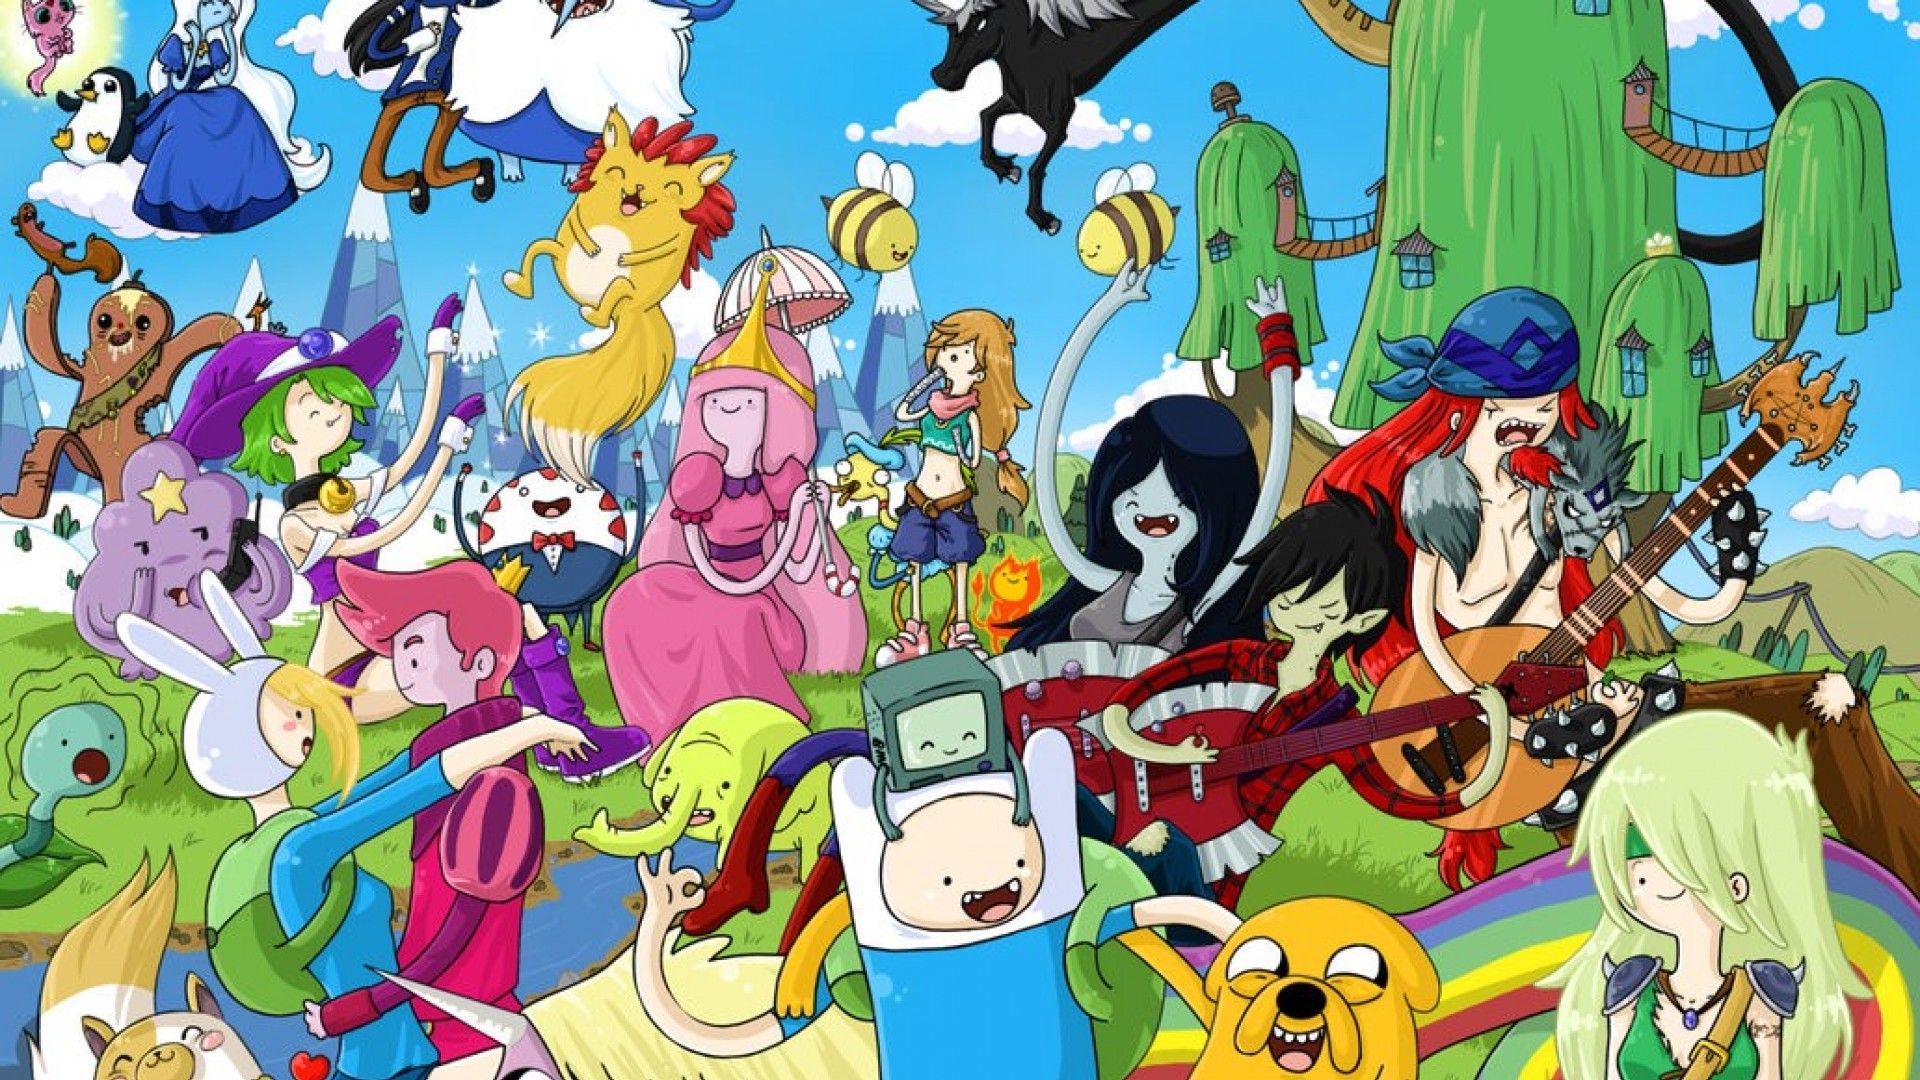 Free download Adventure Time Hd Wallpapers Wallducom 1920x1080.